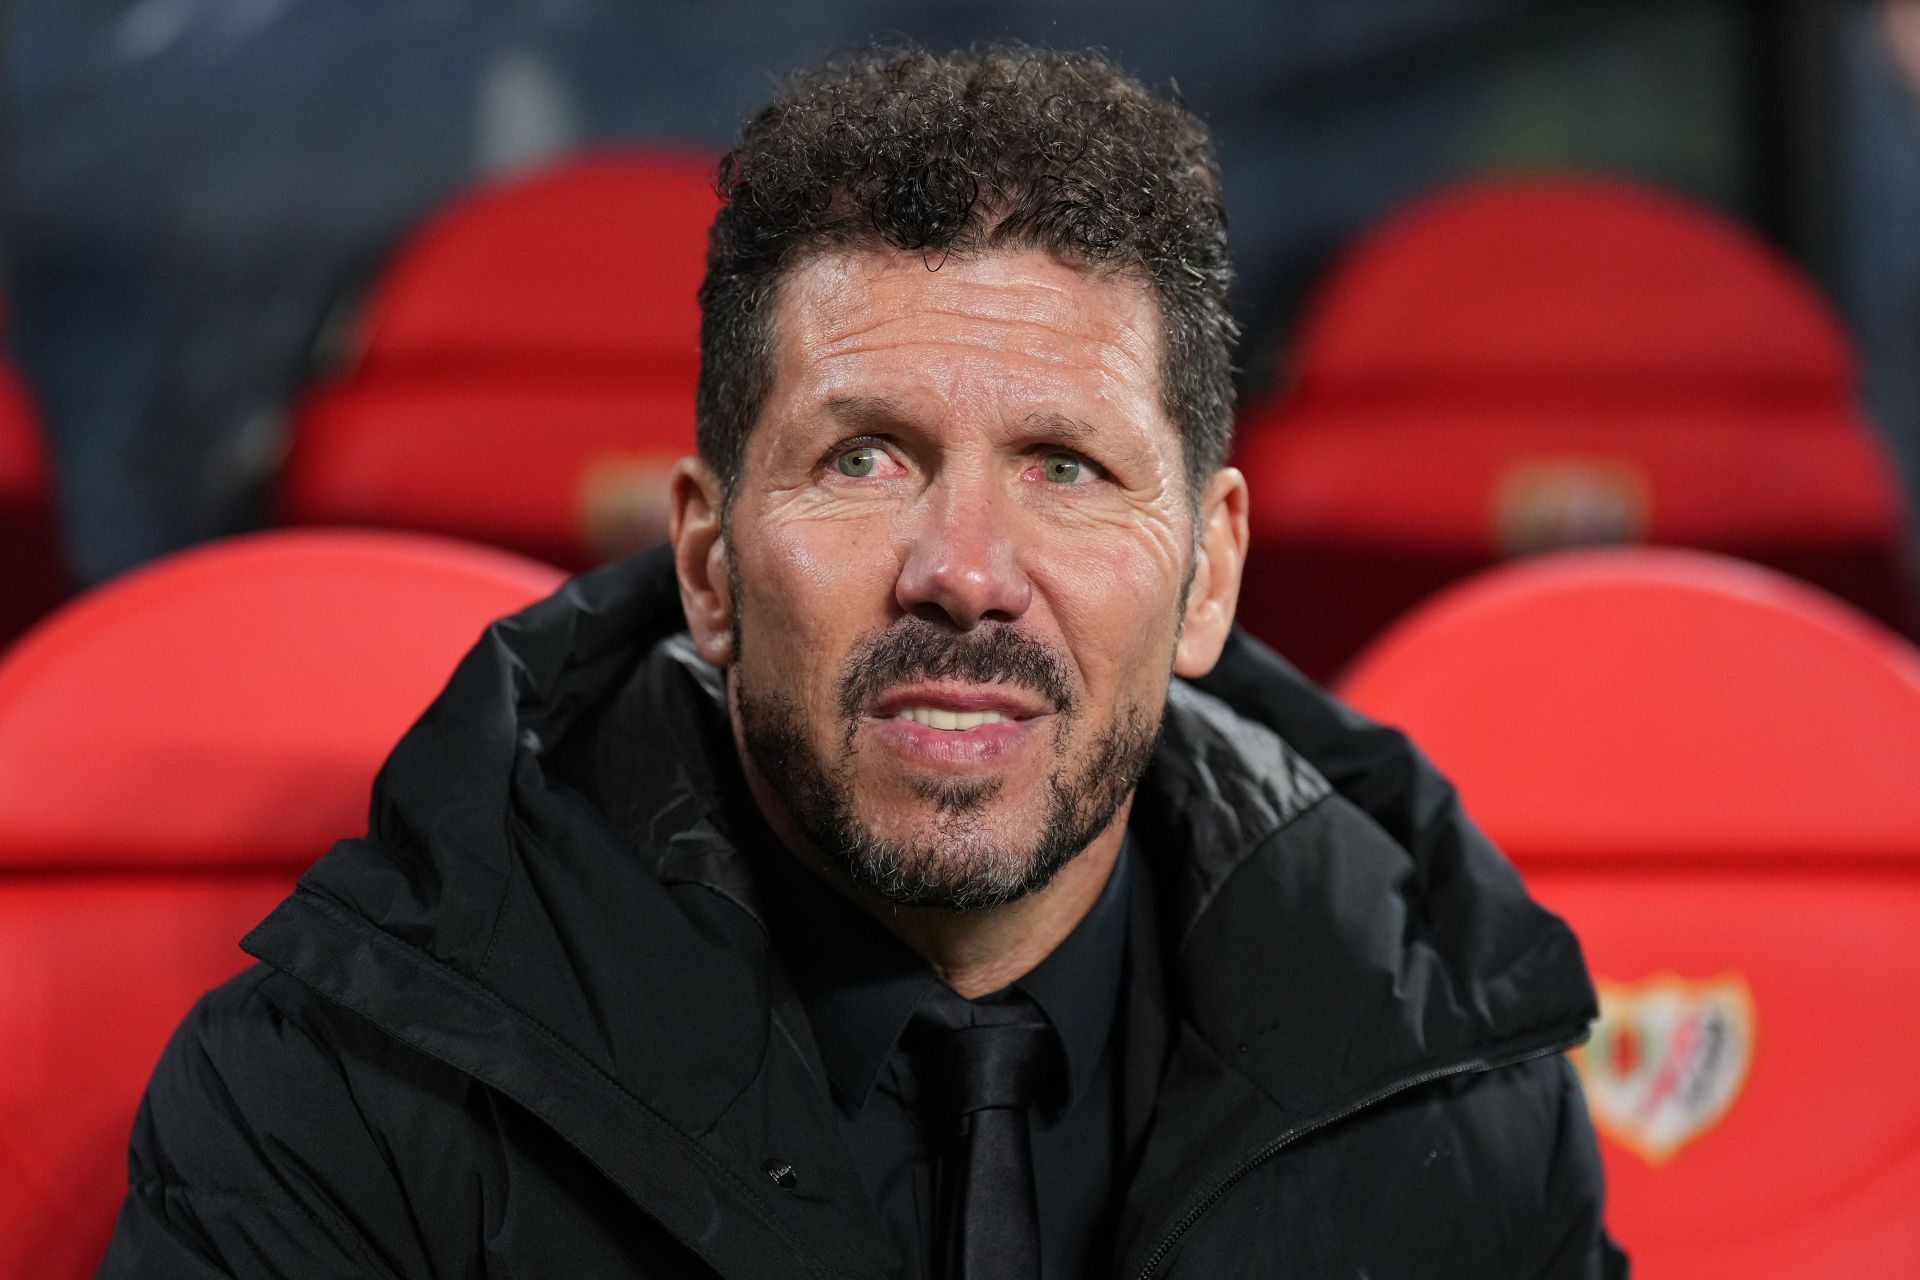 Diego Simeone has been outstanding since taking charge at Atletico Madrid.